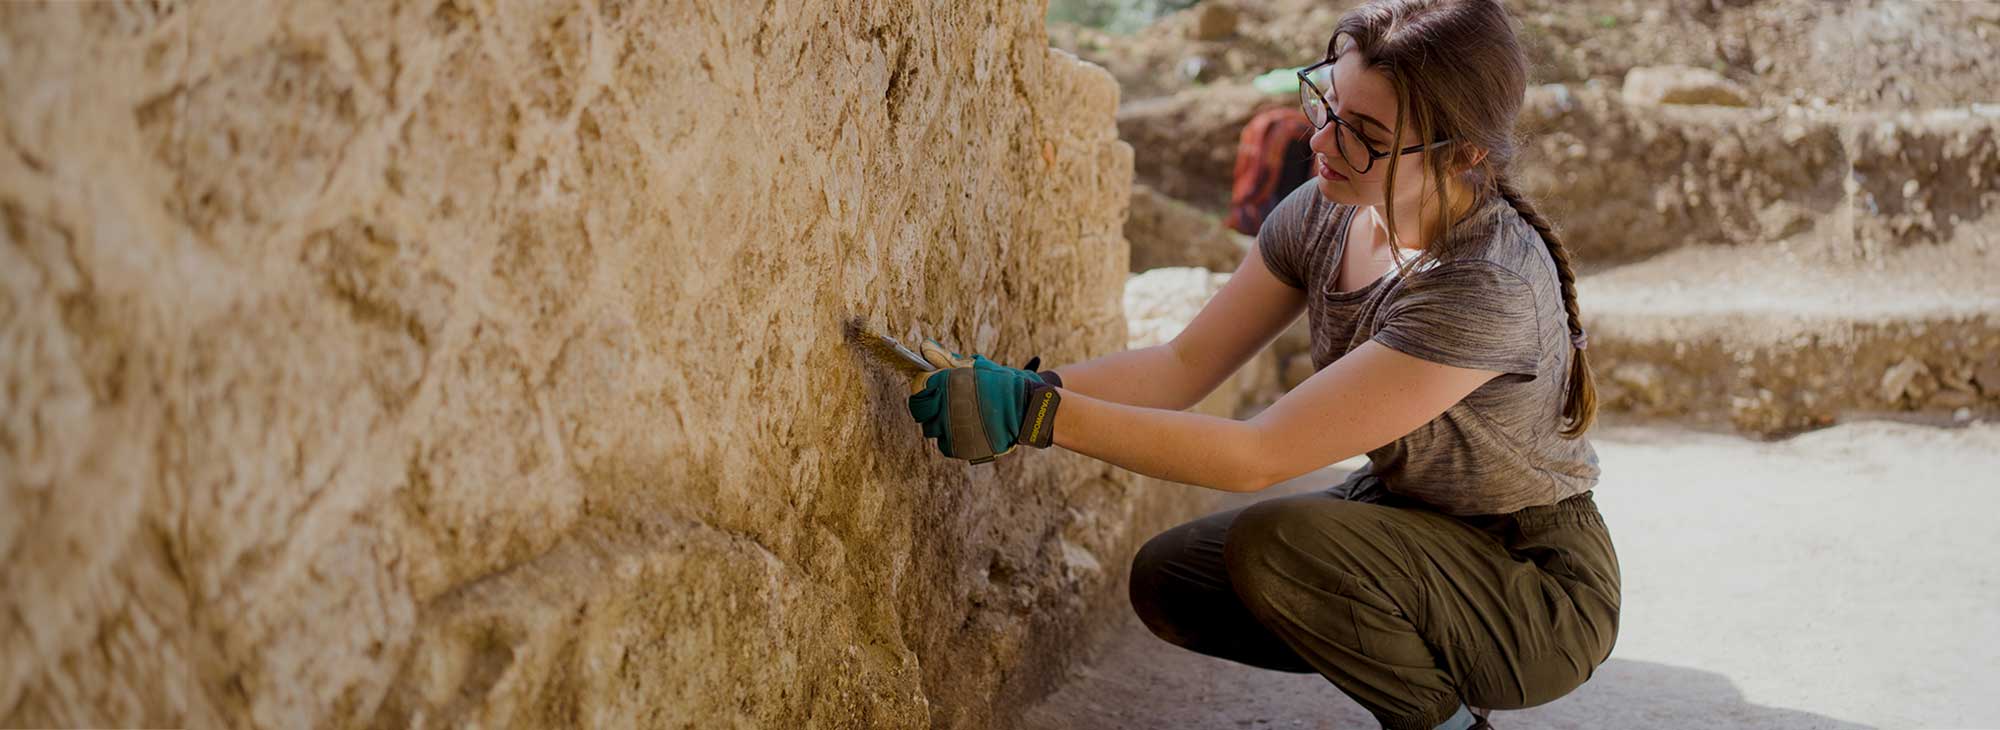 A person is excavating an ancient wall.